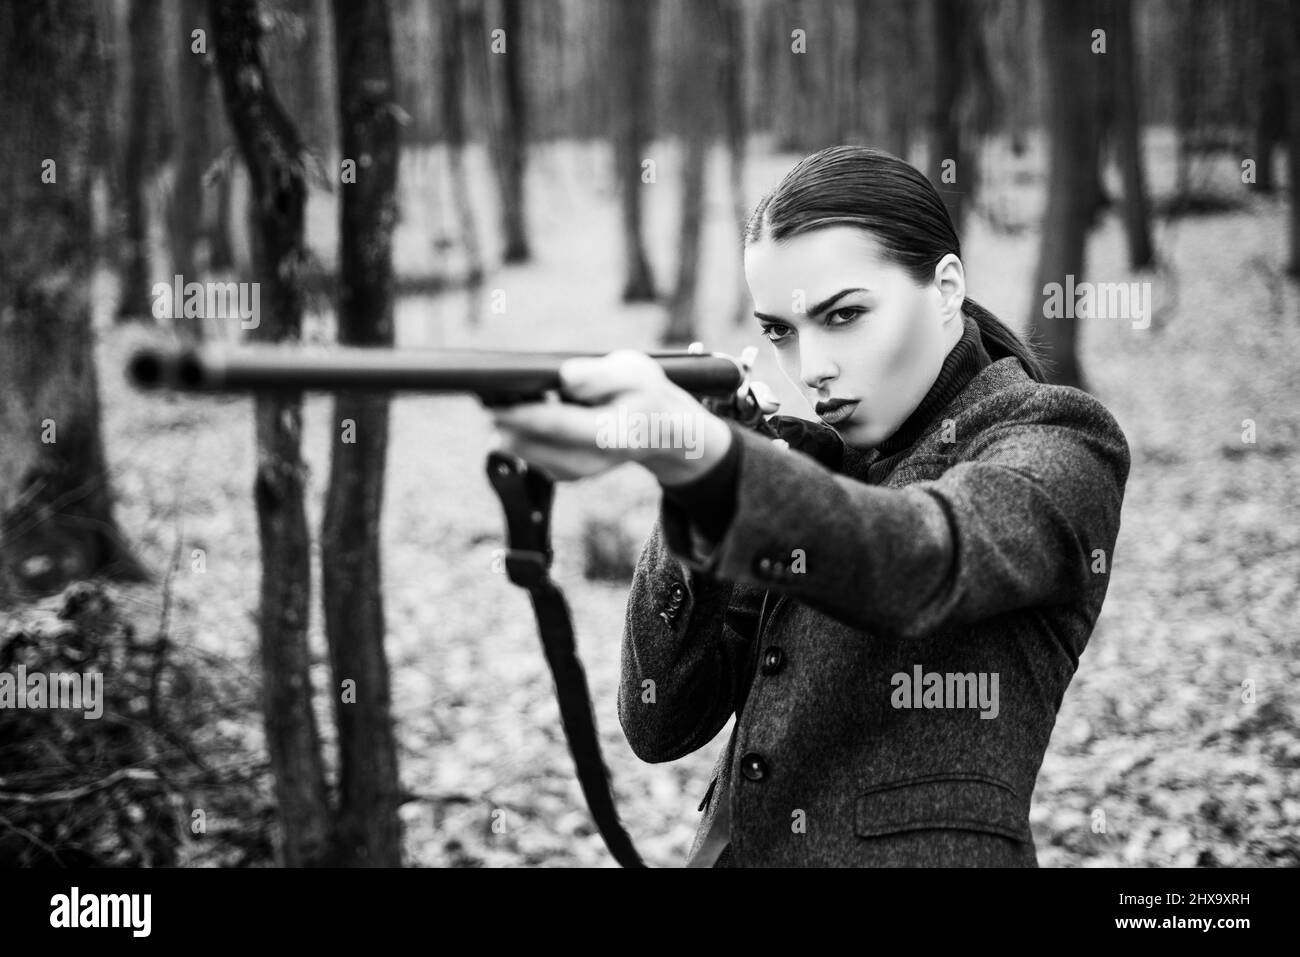 Hunting weapon gun or rifle. military fashion. achievements of goals. girl with rifle. chase hunting. Gun shop. woman with weapon. Target shot. female Stock Photo